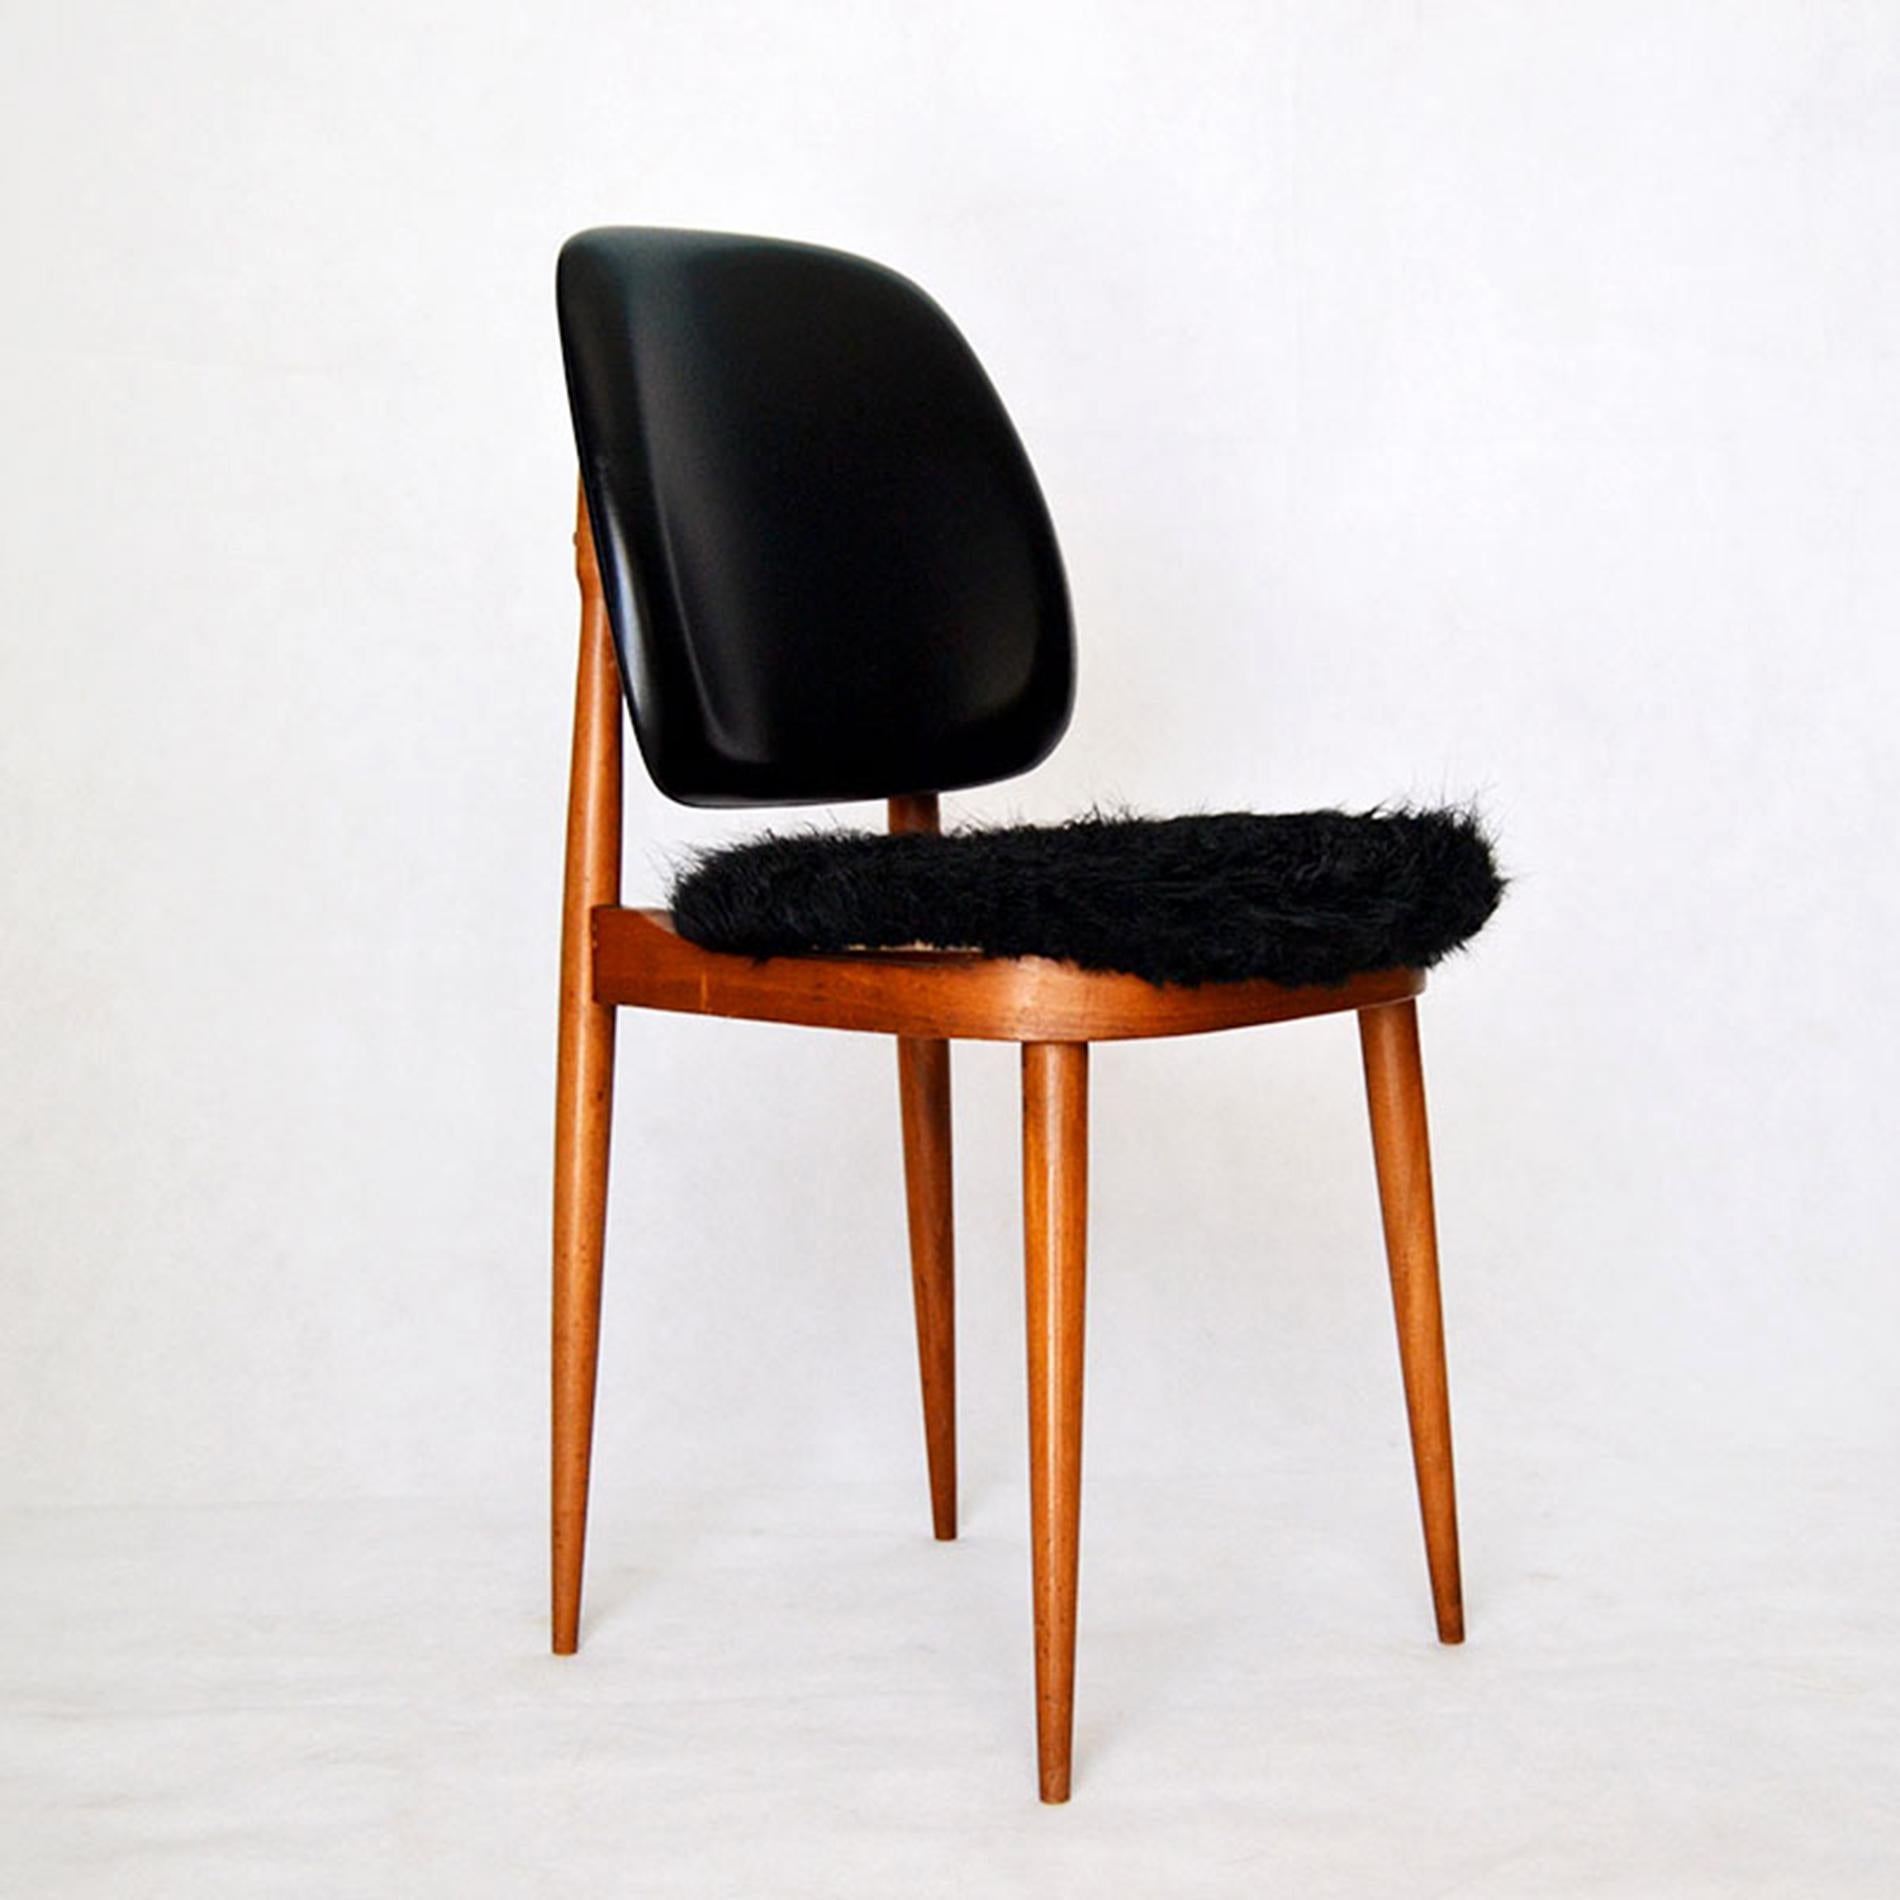 Set of six Pegase chairs edited by Baumann designed by Pierre Guariche in beech wood and original upholstery. 
Furniture designed by Pierre Guariche, France
circa 1970
Good vintage condition
Documentation: attached 